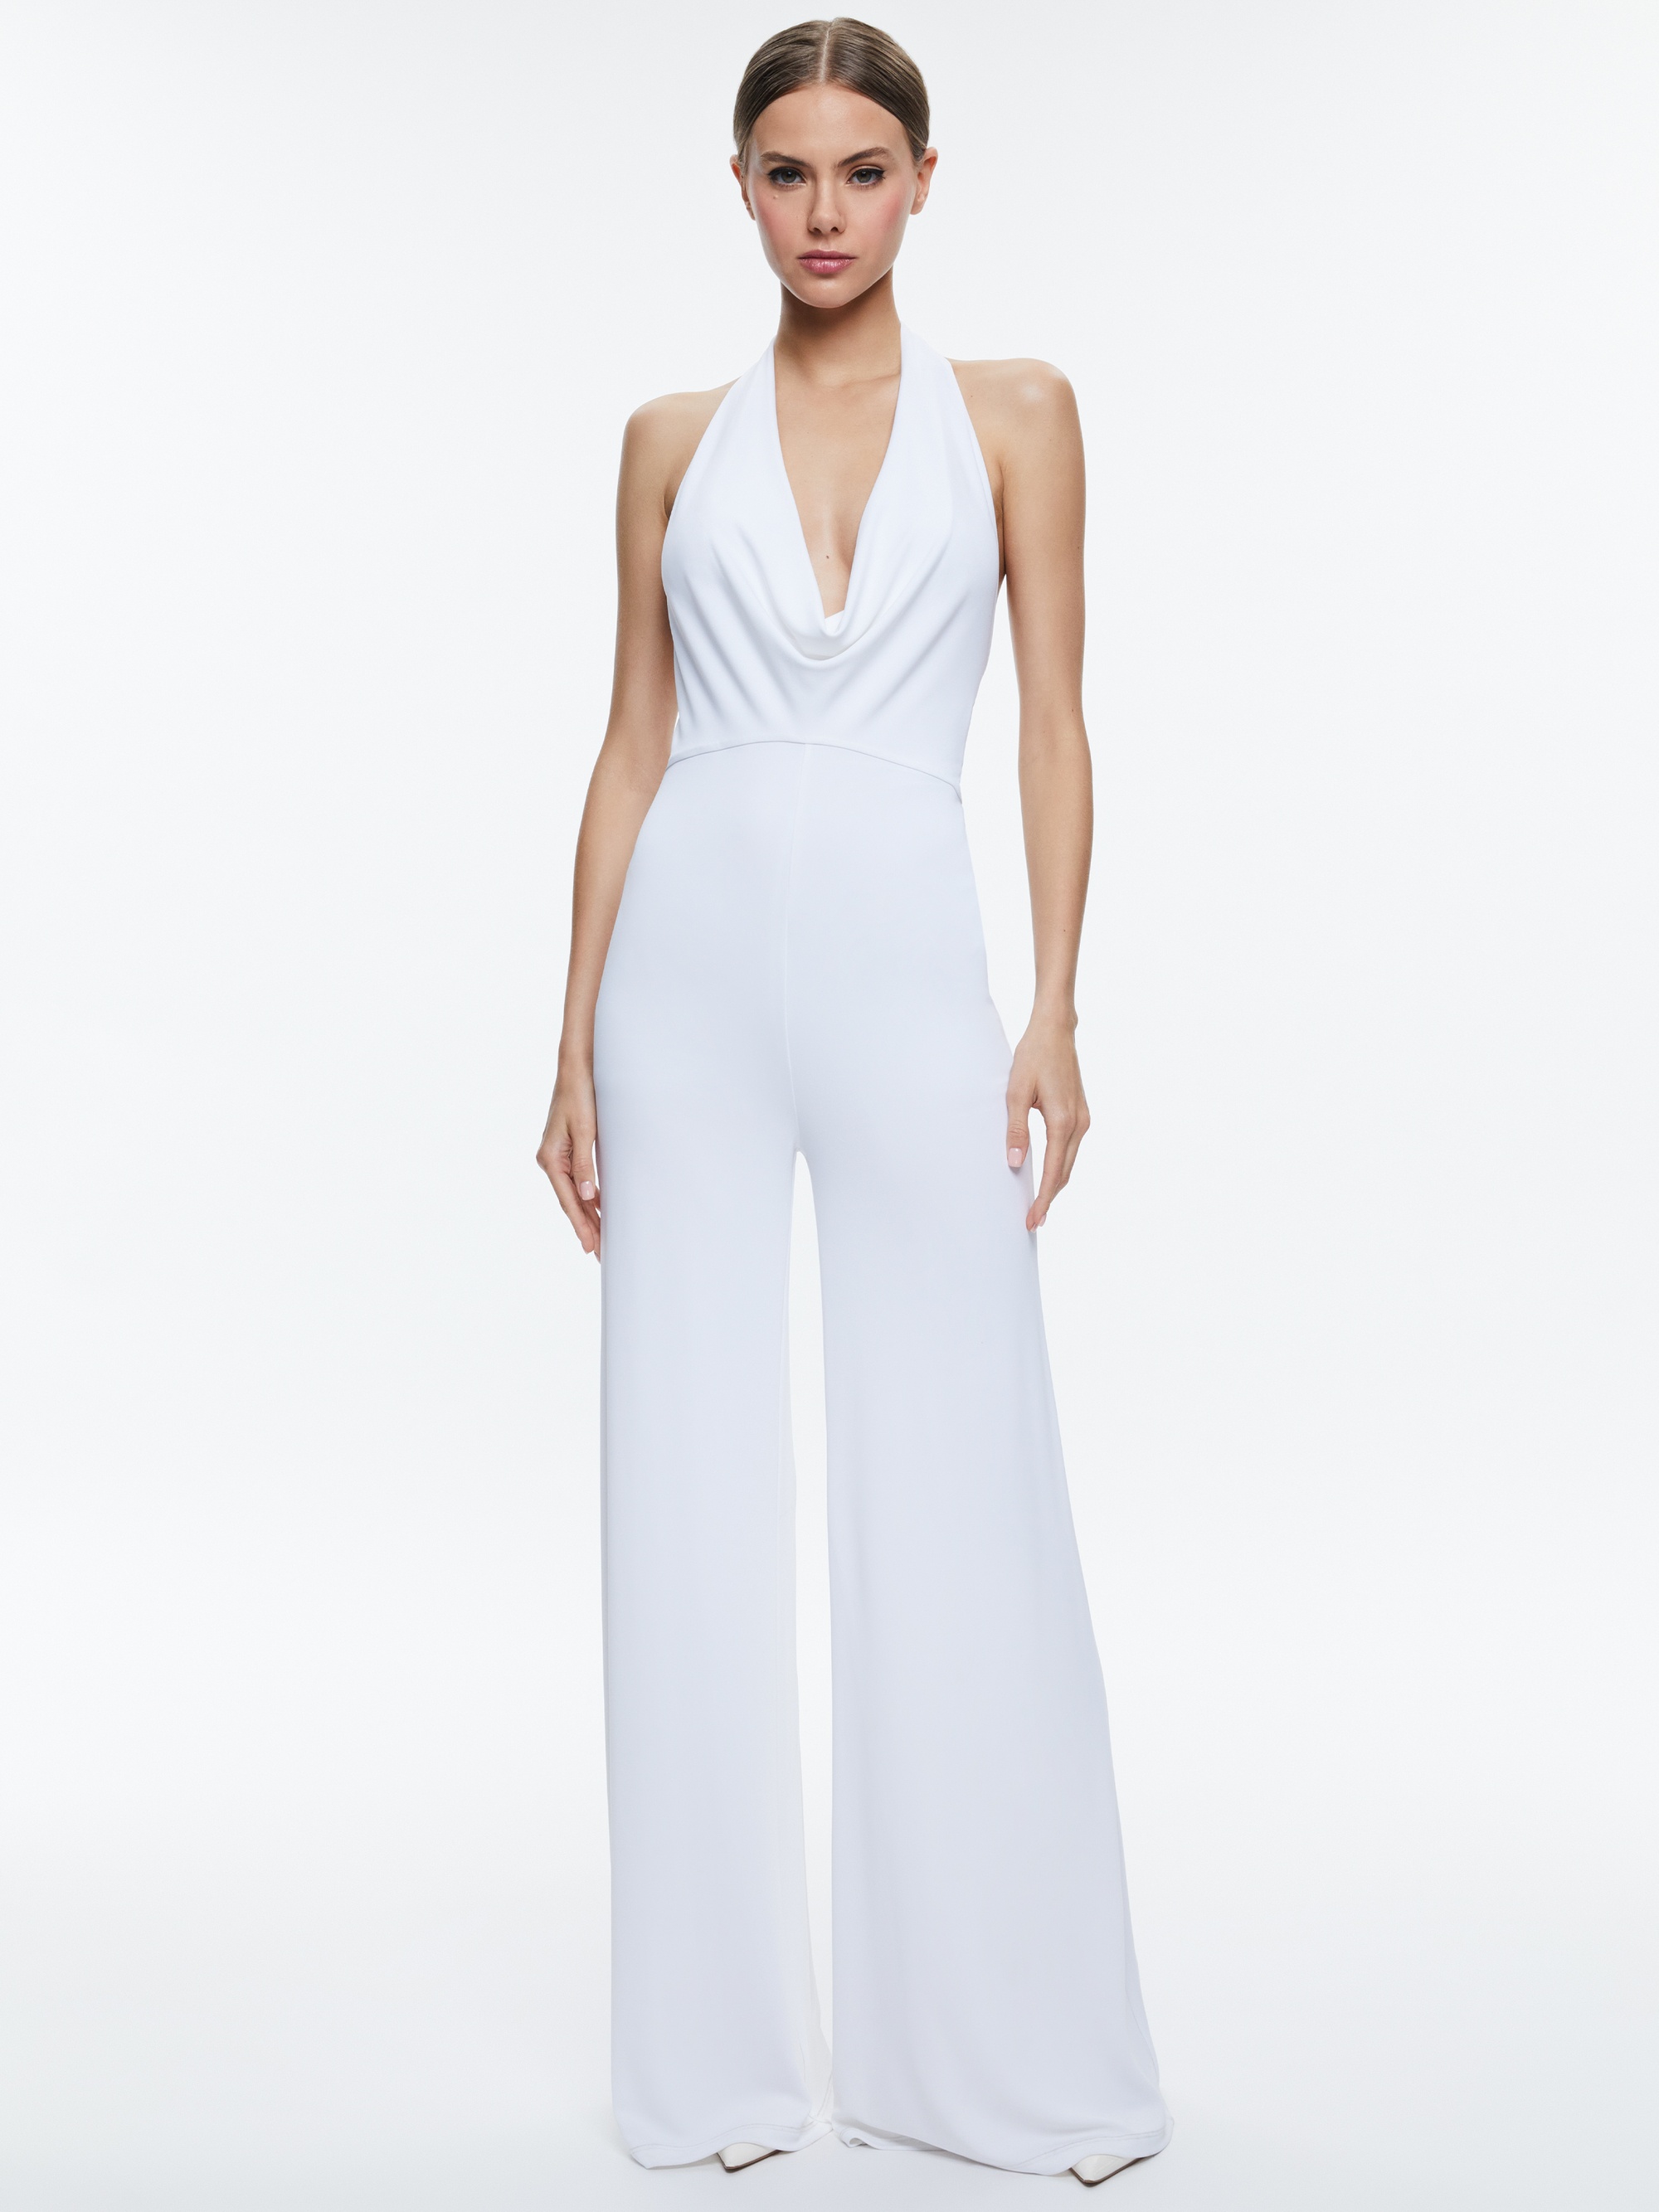 COLBY COWL NECK OPEN BACK JUMPSUIT - 2